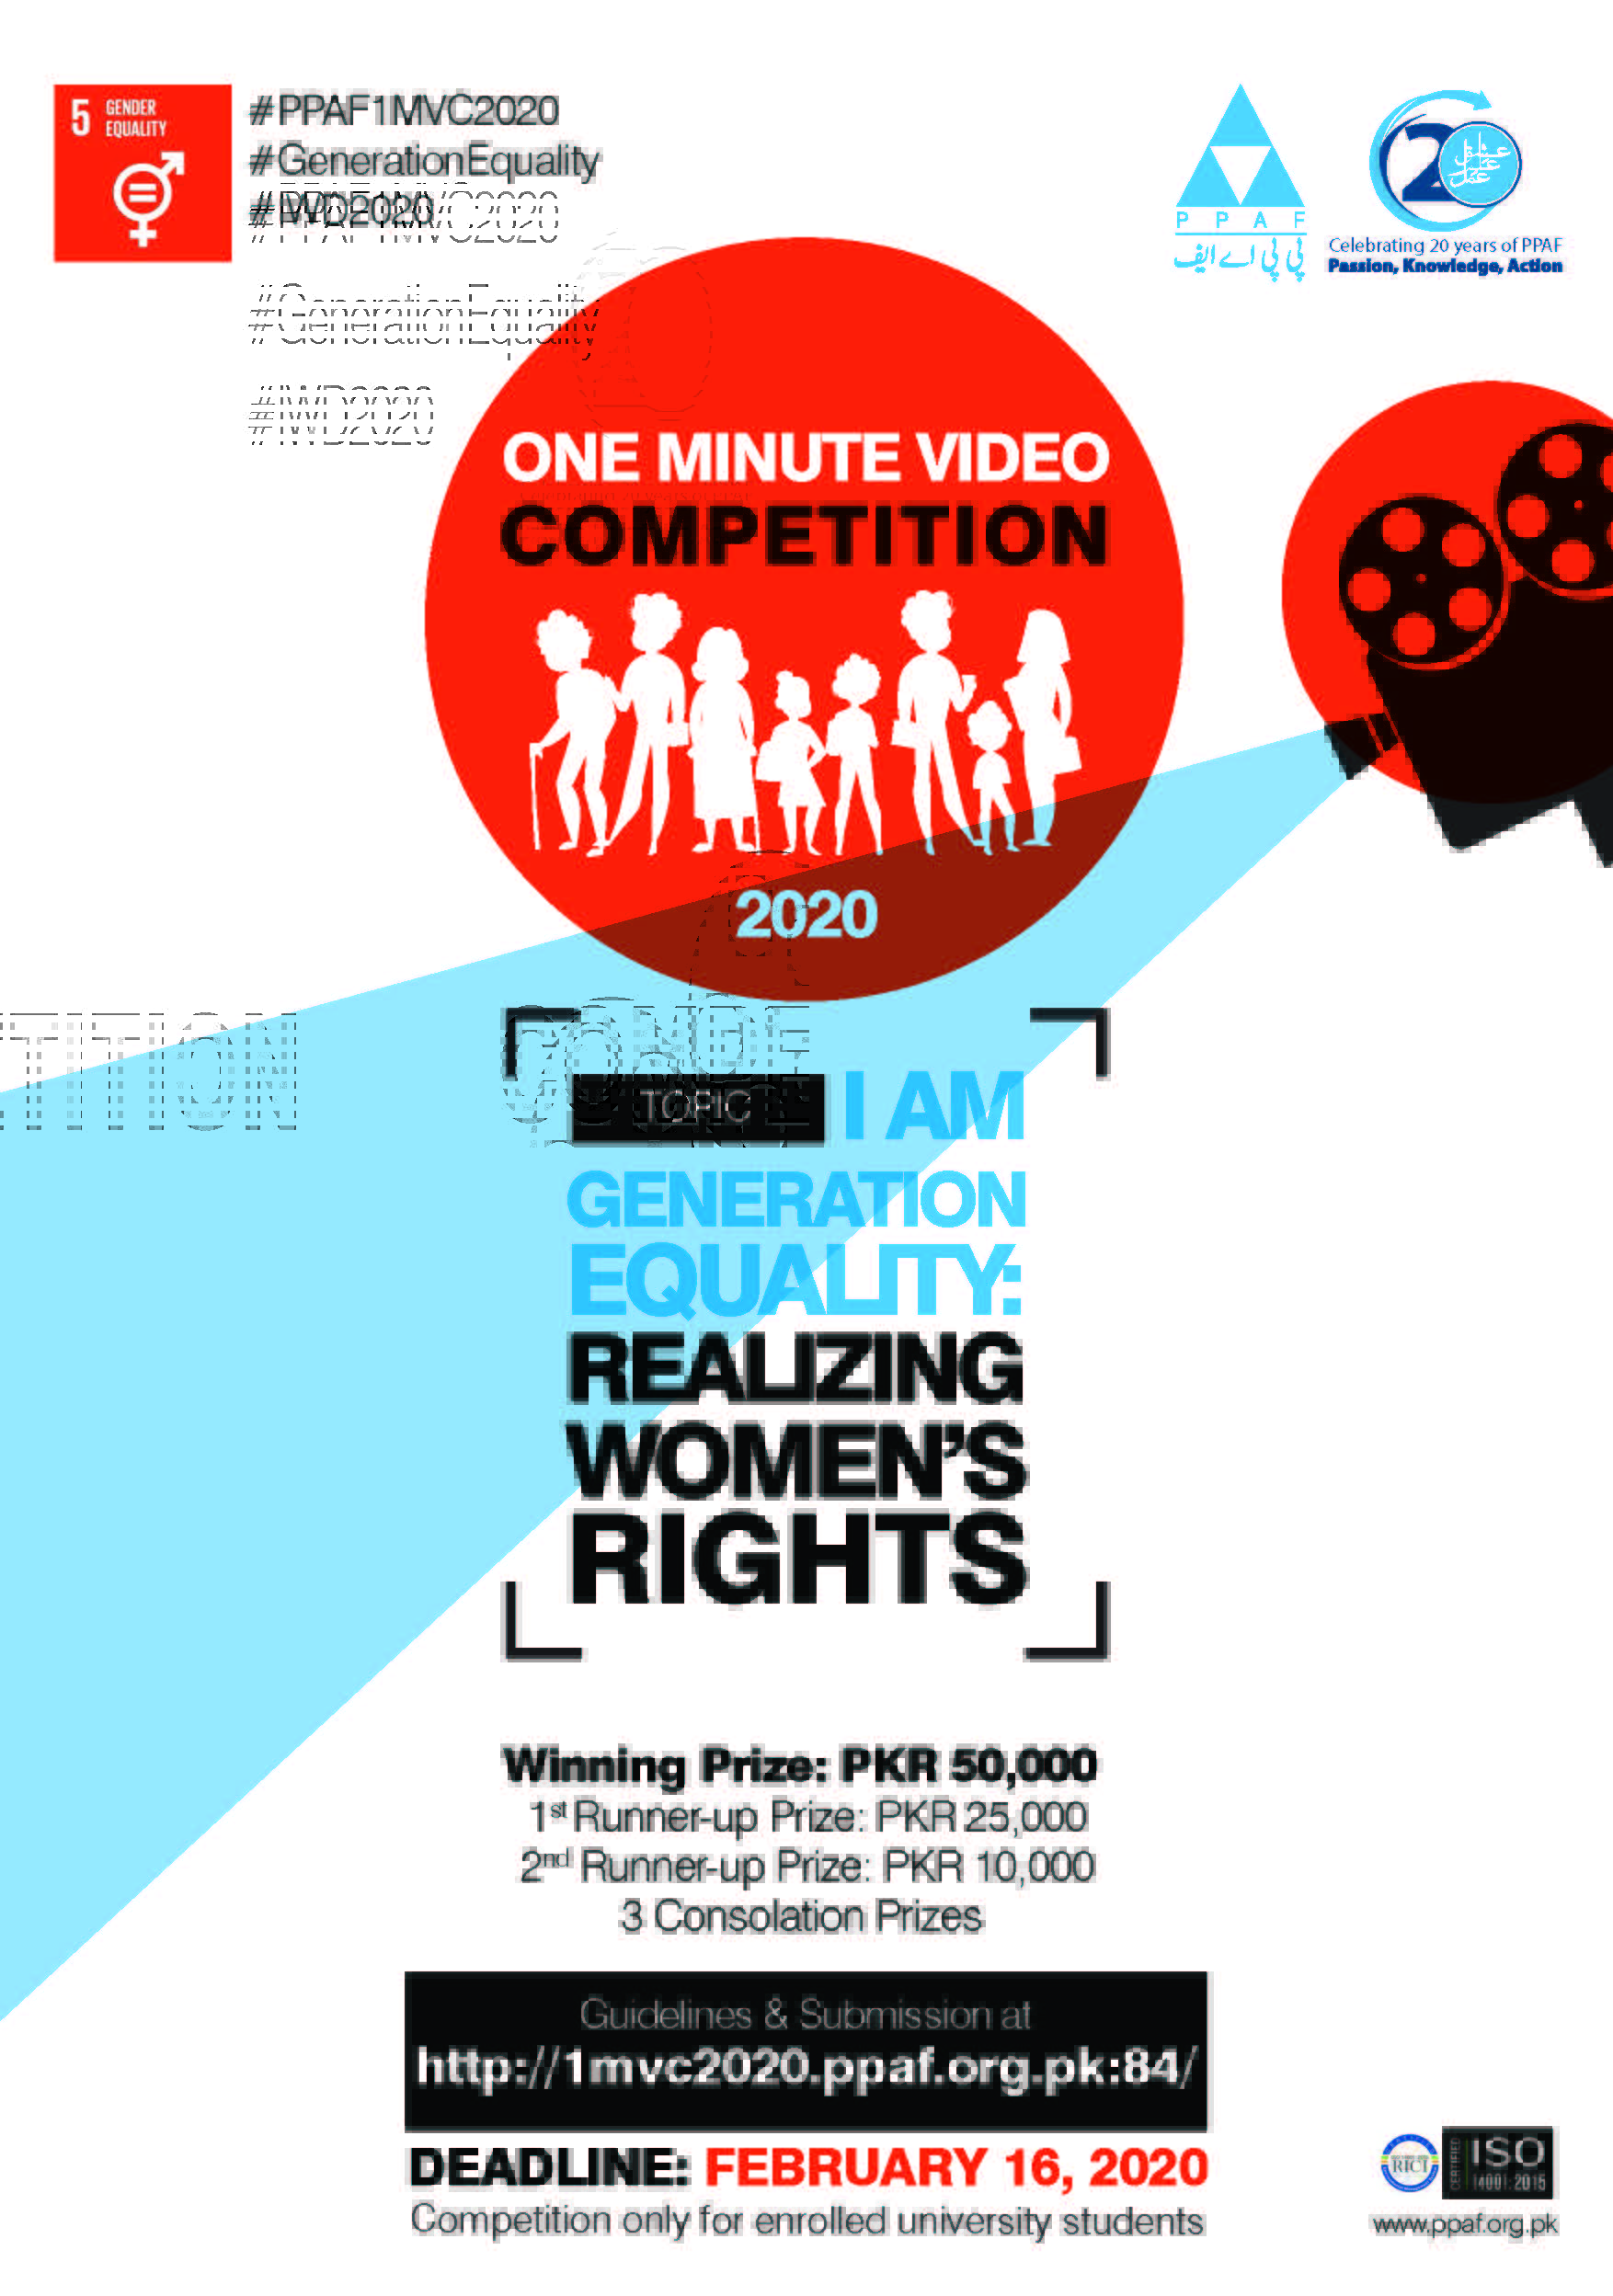 Pakistan Poverty Alleviation Fund launches 1 Minute Video Contest on Women Rights for University Students